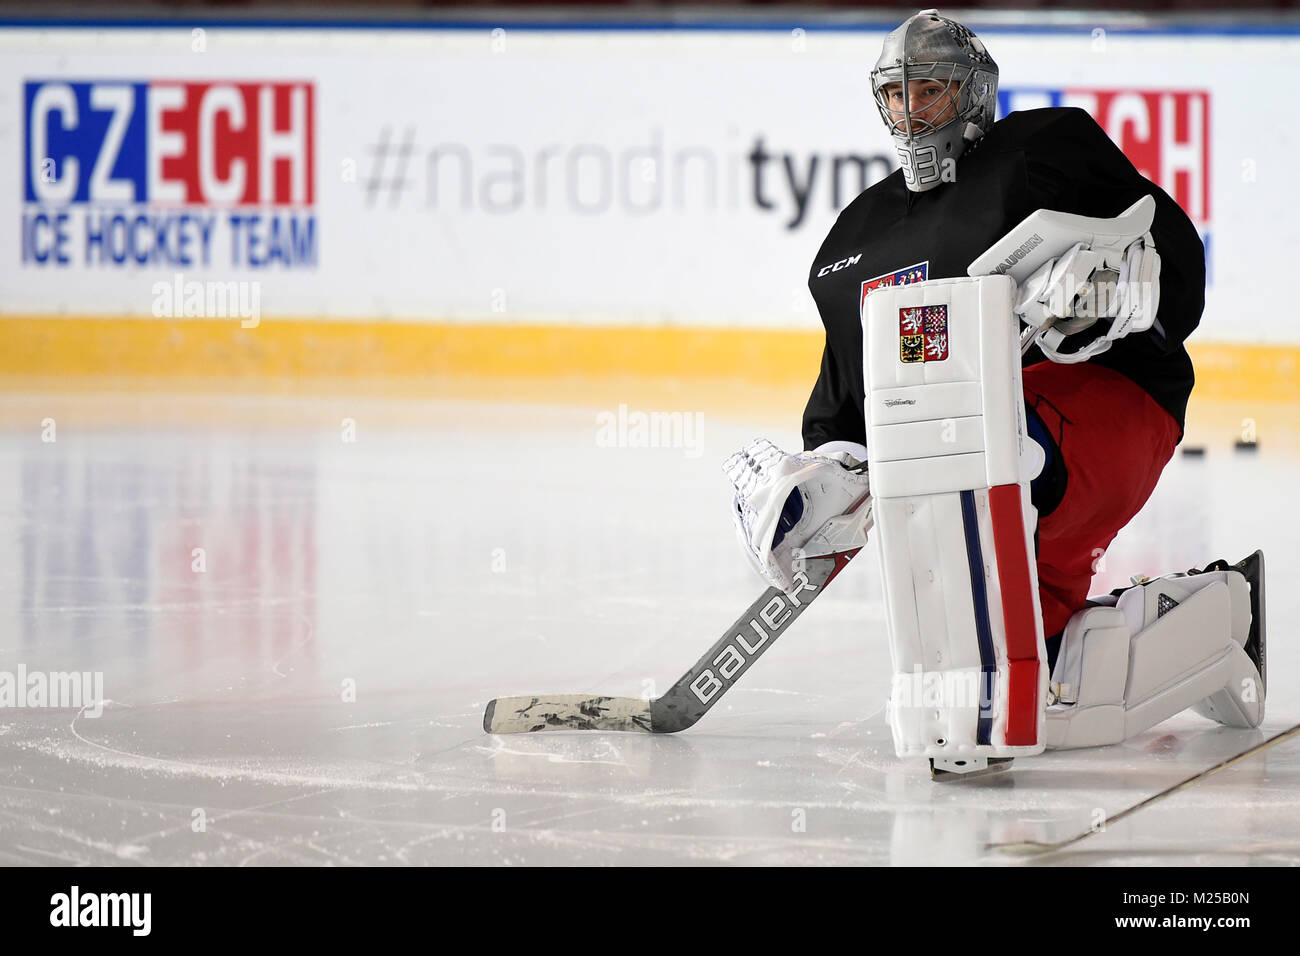 Prague, Czech Republic. 04th Feb, 2018. The Czech national team goalkeeper Pavel Francouz attends a training session in Prague, Czech Republic, on Sunday, February 4, 2018, prior to the 2018 Winter Olympics in Pyeongchang, South Korea. Credit: Ondrej Deml/CTK Photo/Alamy Live News Stock Photo